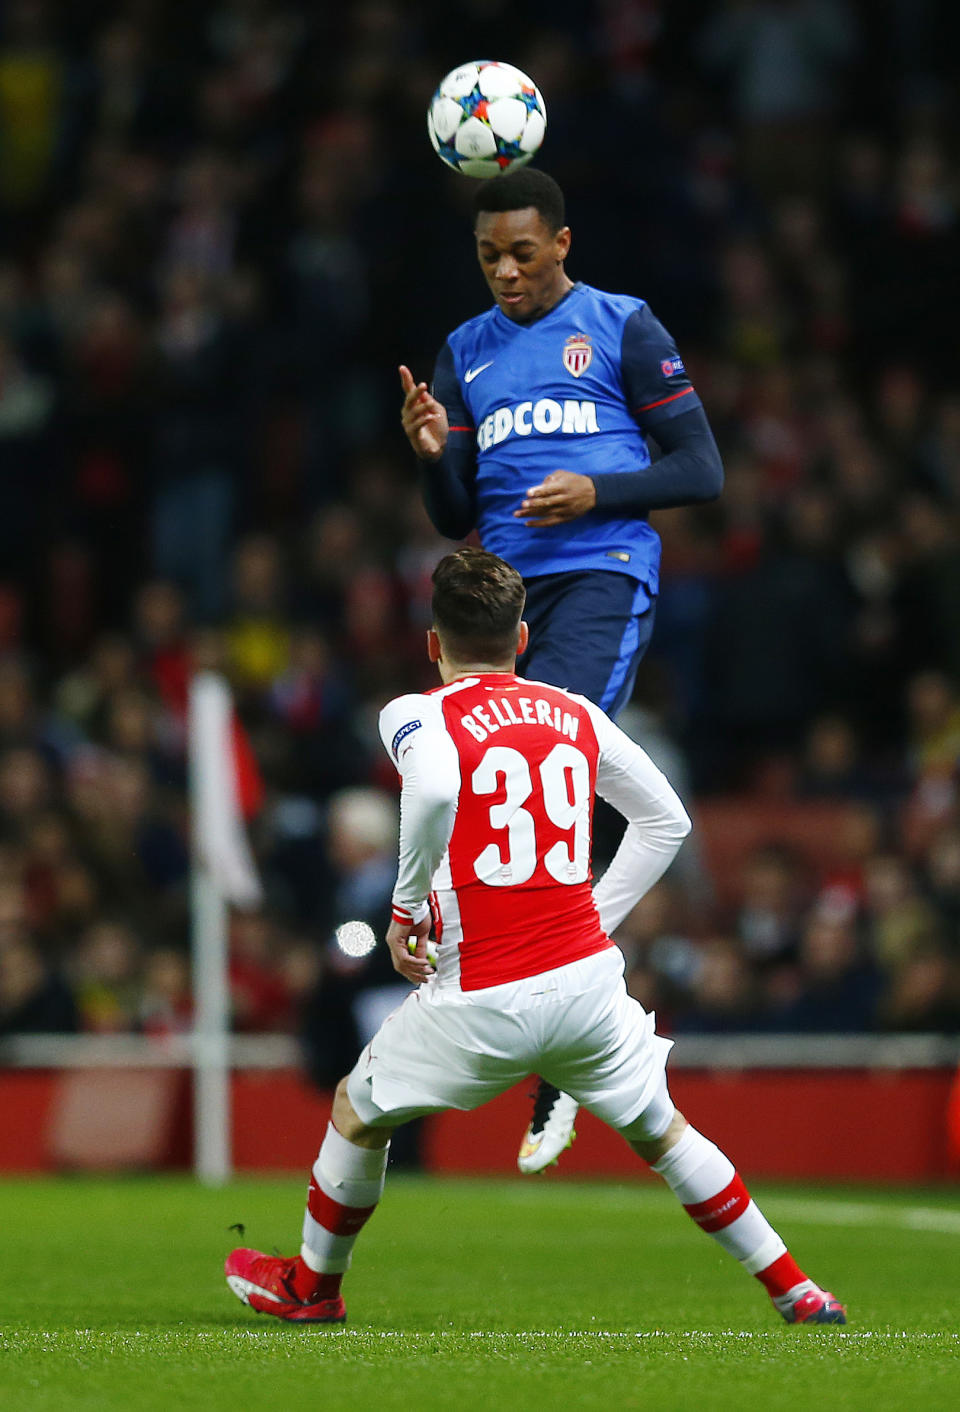 Football - Arsenal v AS Monaco - UEFA Champions League Second Round First Leg - Emirates Stadium, London, England - 25/2/15 Arsenal's Hector Bellerin in action with Monaco's Anthony Martial Reuters / Eddie Keogh Livepic EDITORIAL USE ONLY.